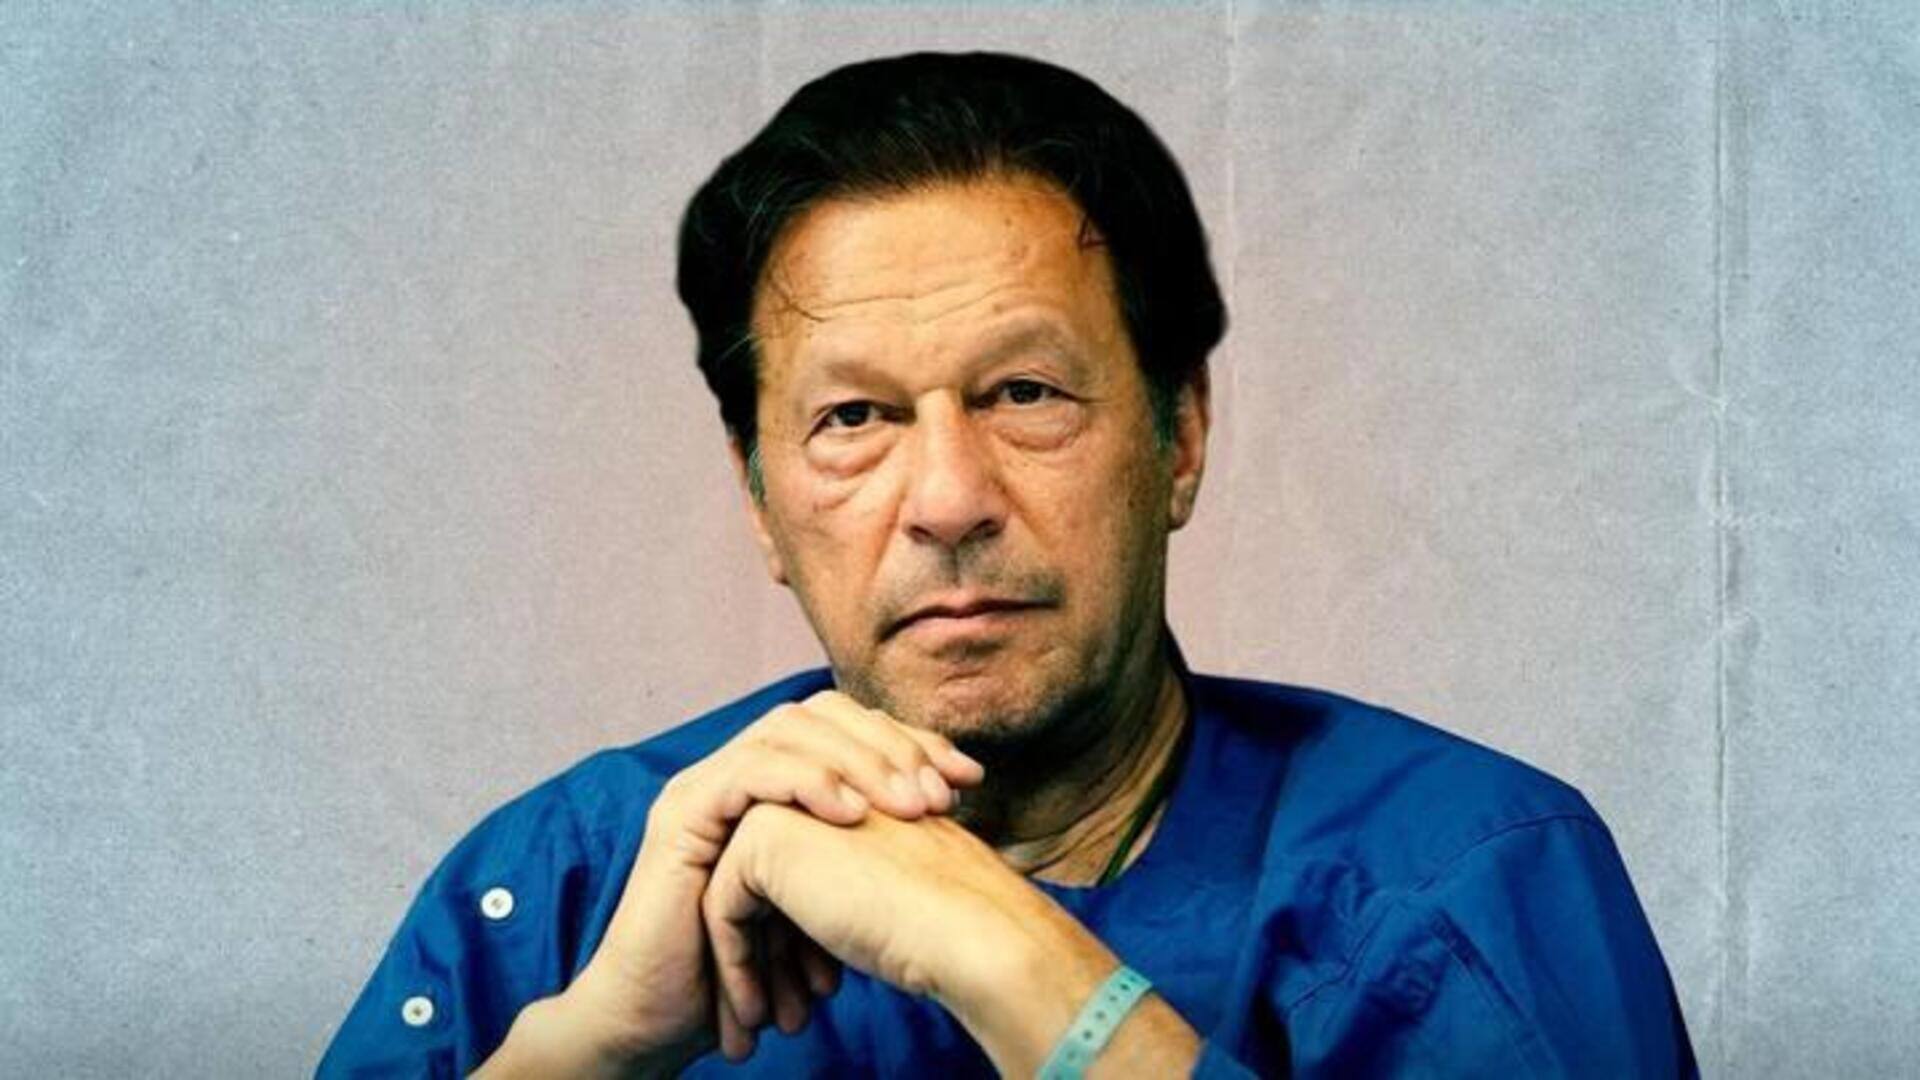 Imran Khan jailed for 10 years for leaking state secrets